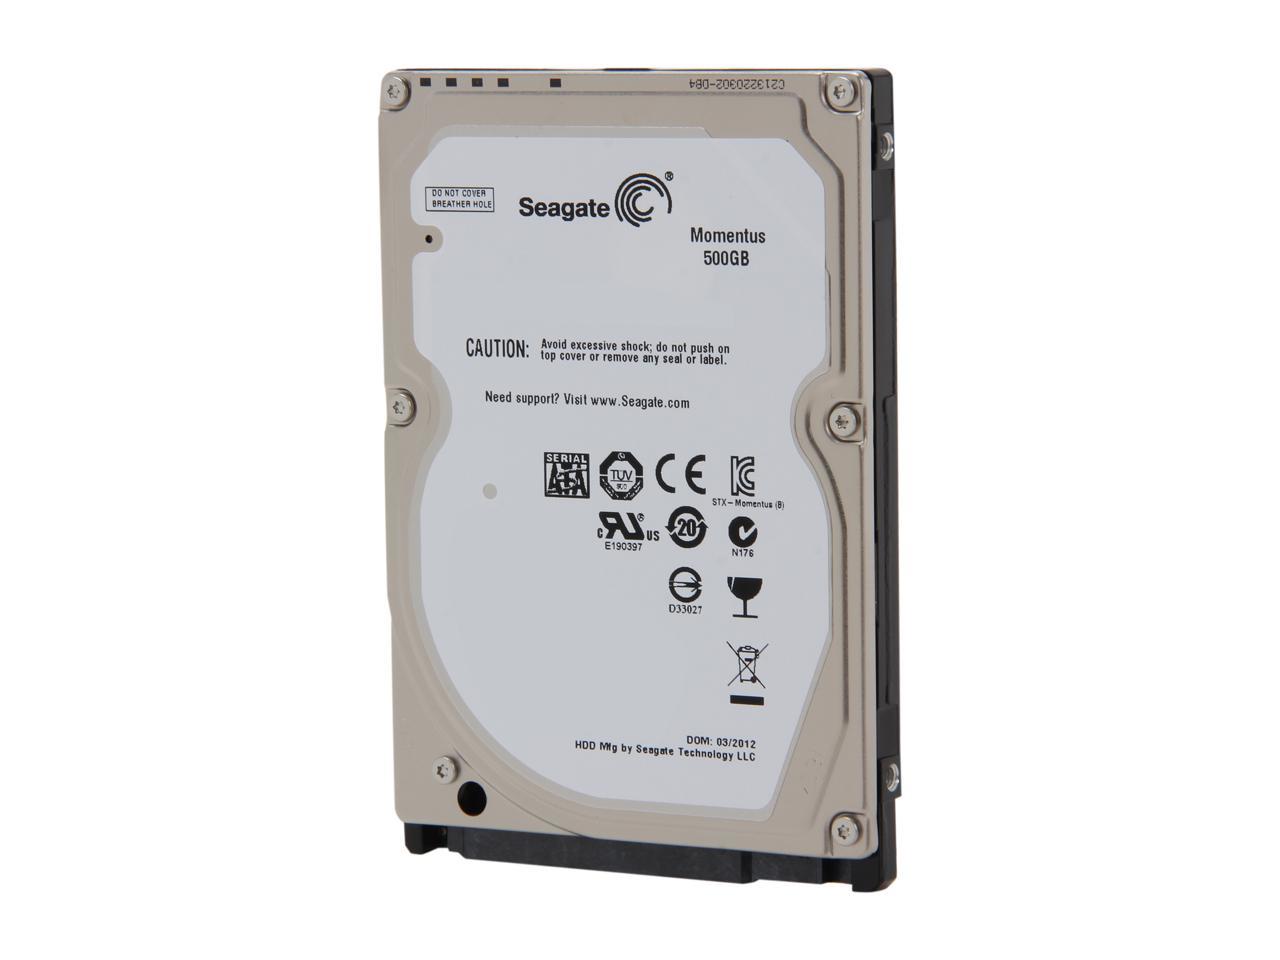 Seagate Momentus 7200.4 ST9500423AS 500GB 7200 RPM 16MB 